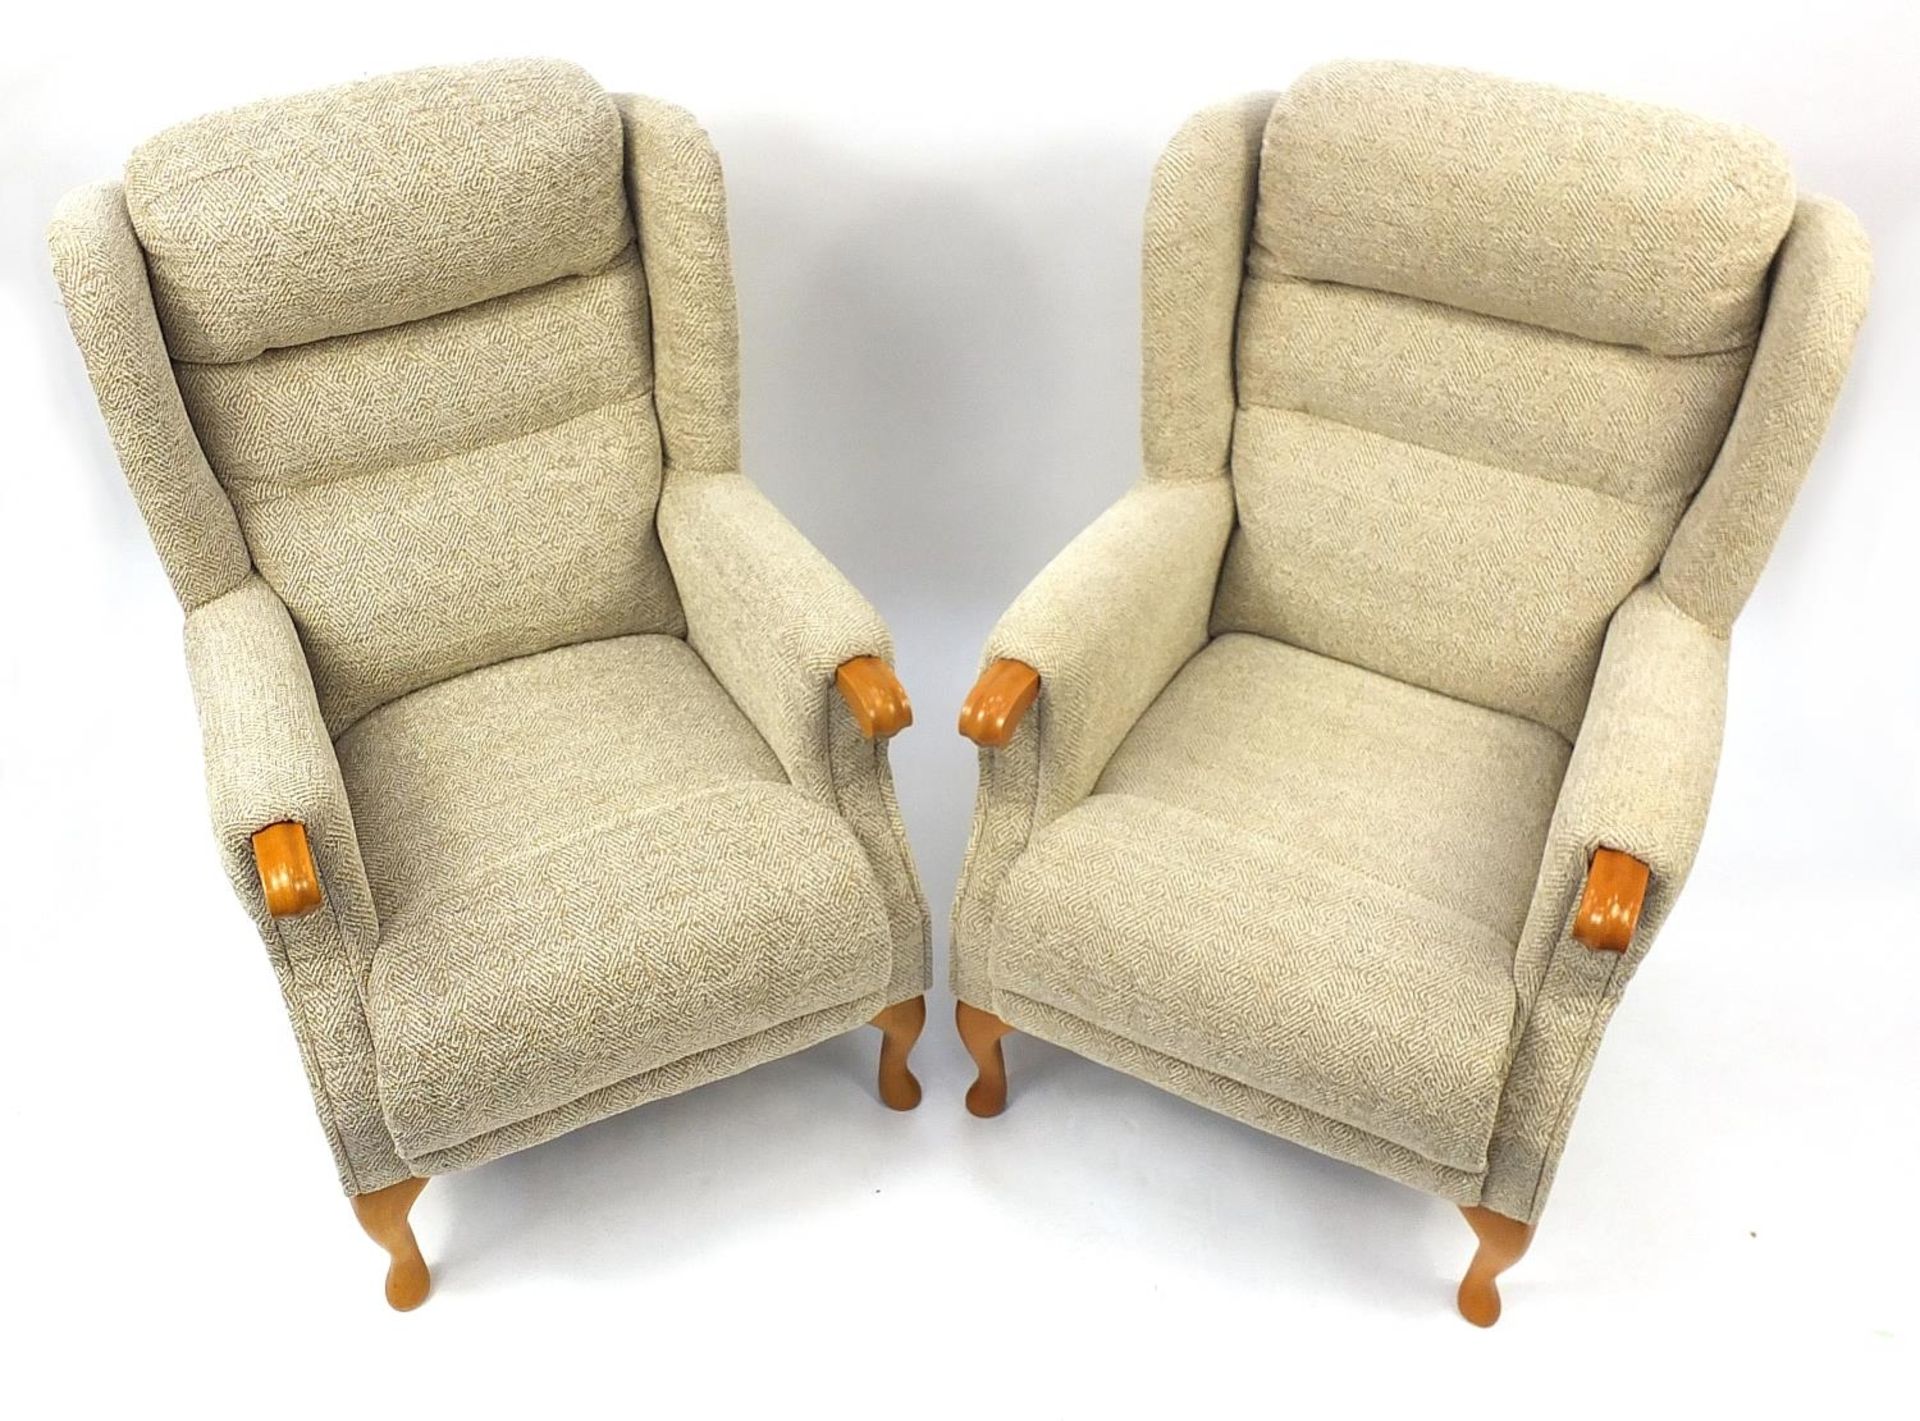 Pair of wingback armchairs with beige upholstery, raised of cabriole legs, 110cm high - Image 2 of 3